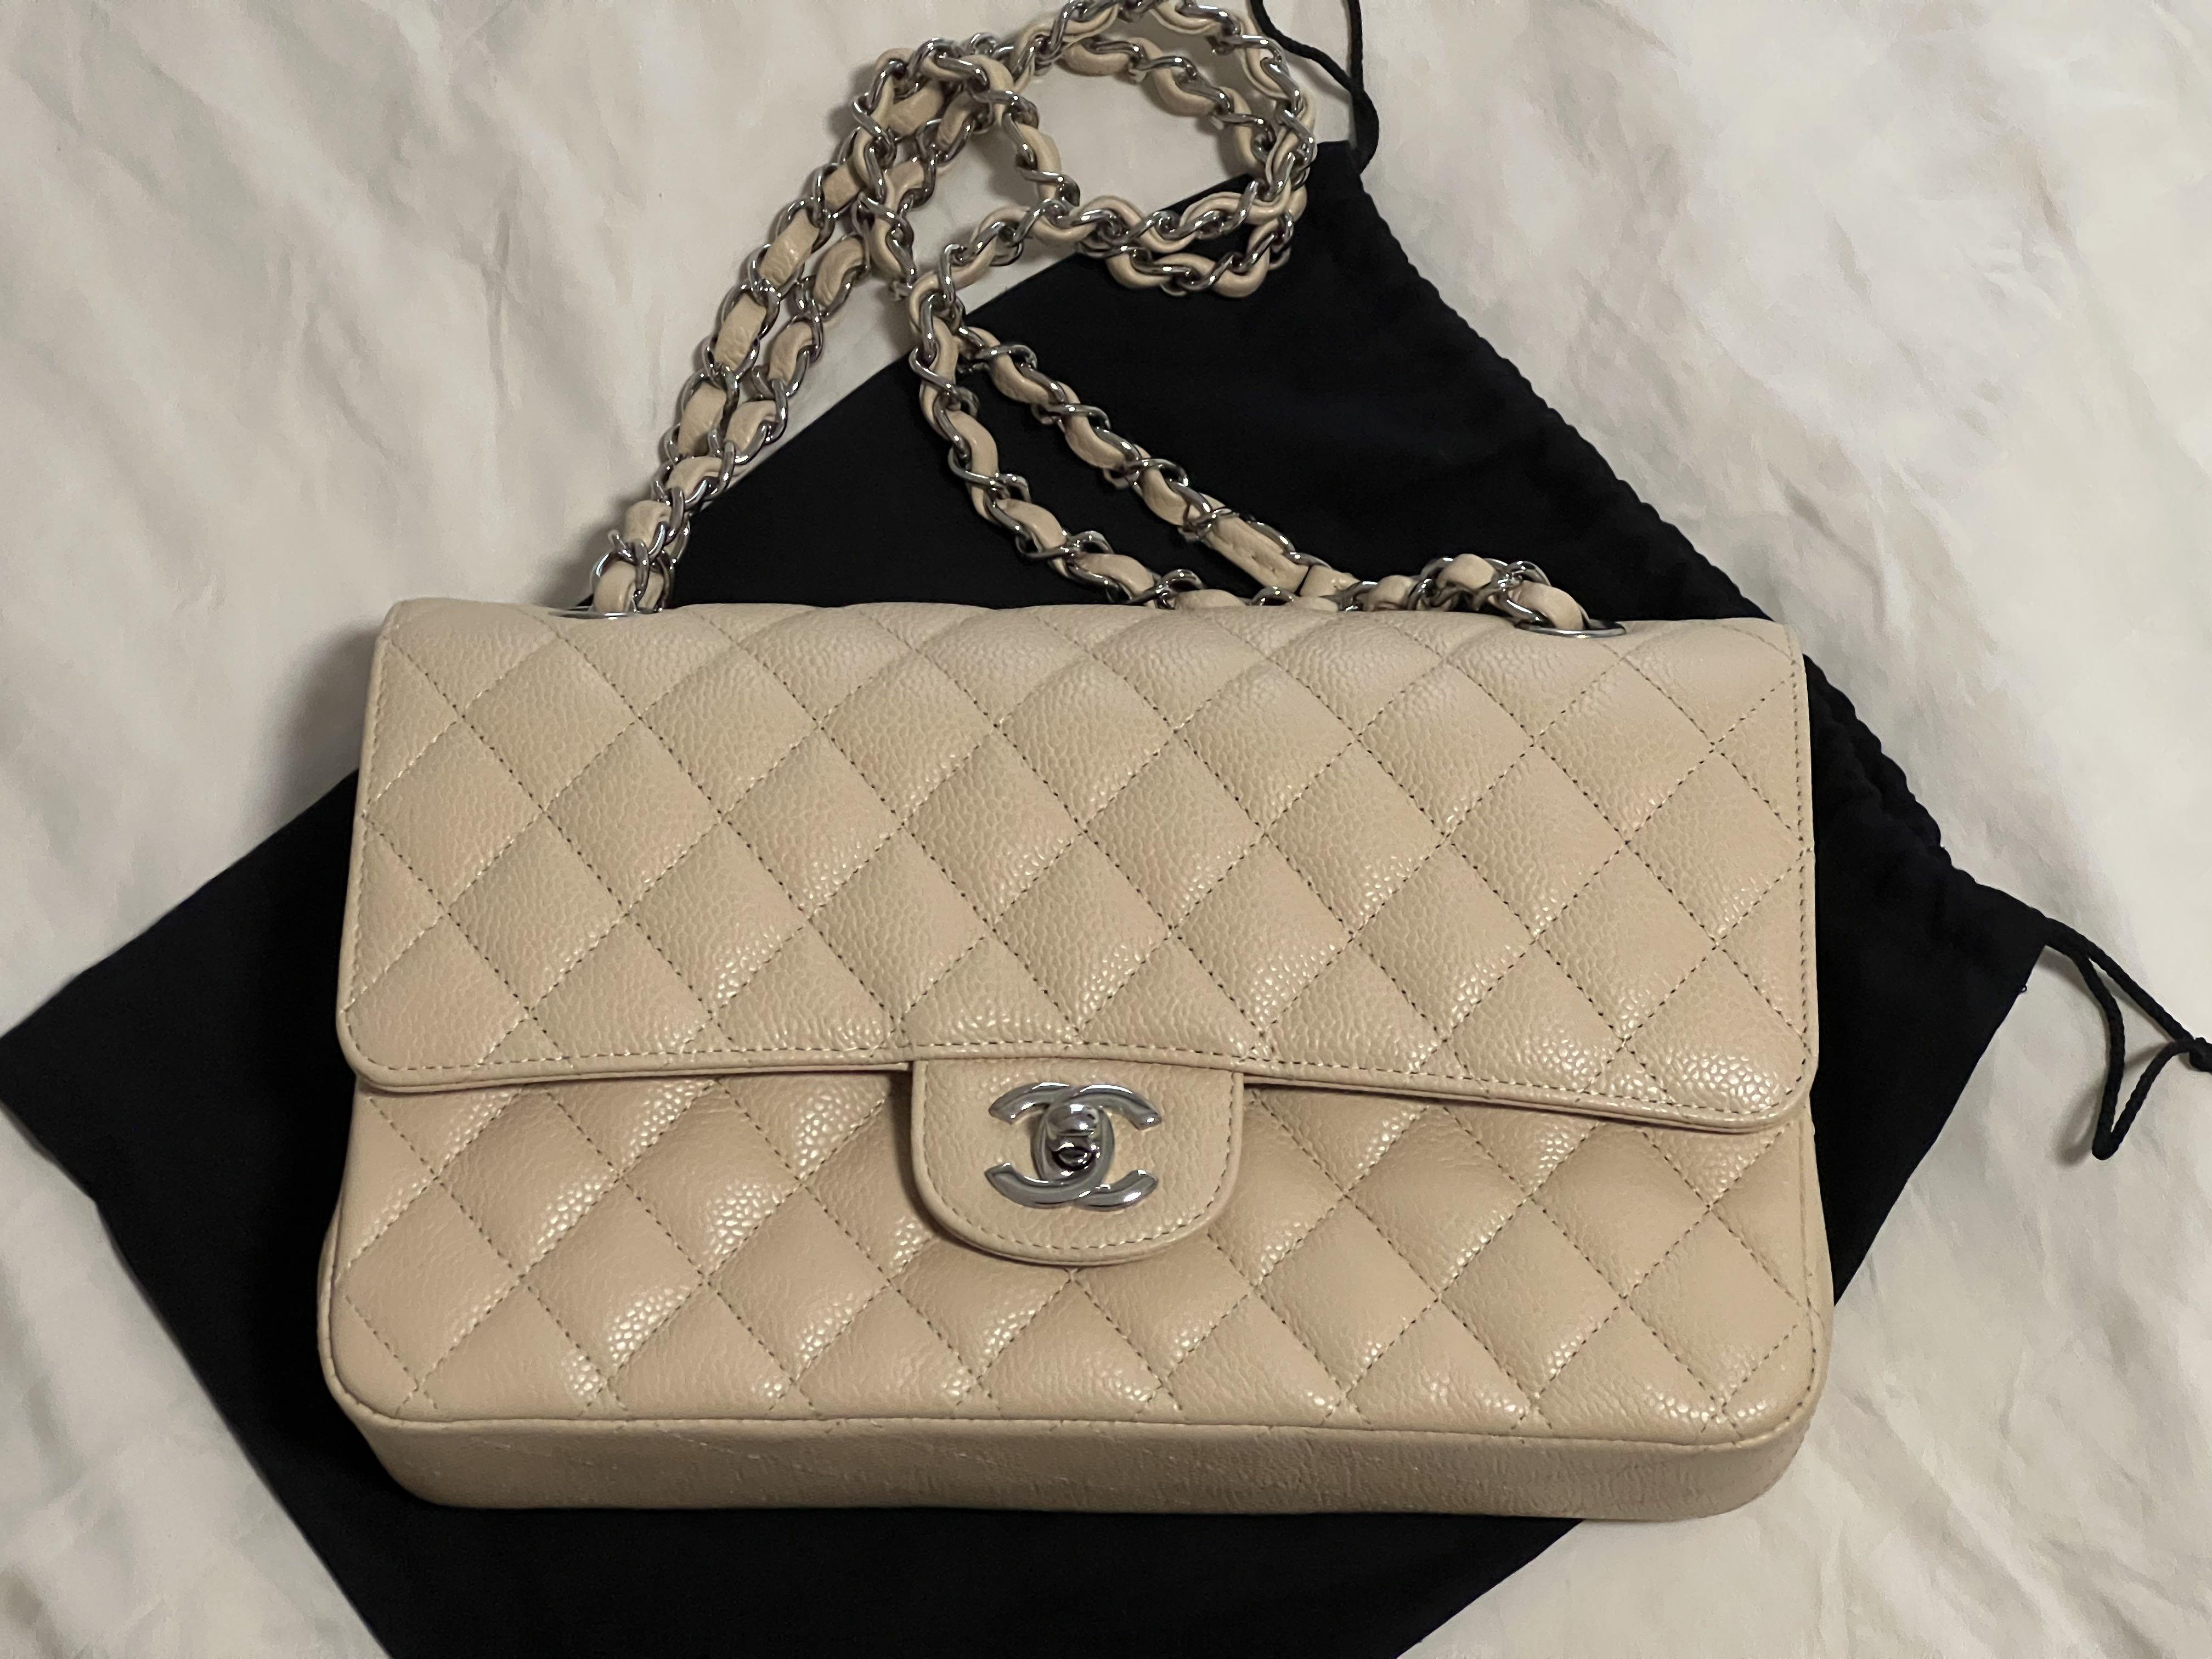 Authentic Chanel Beige Classic Caviar Medium Double Flap Bag with